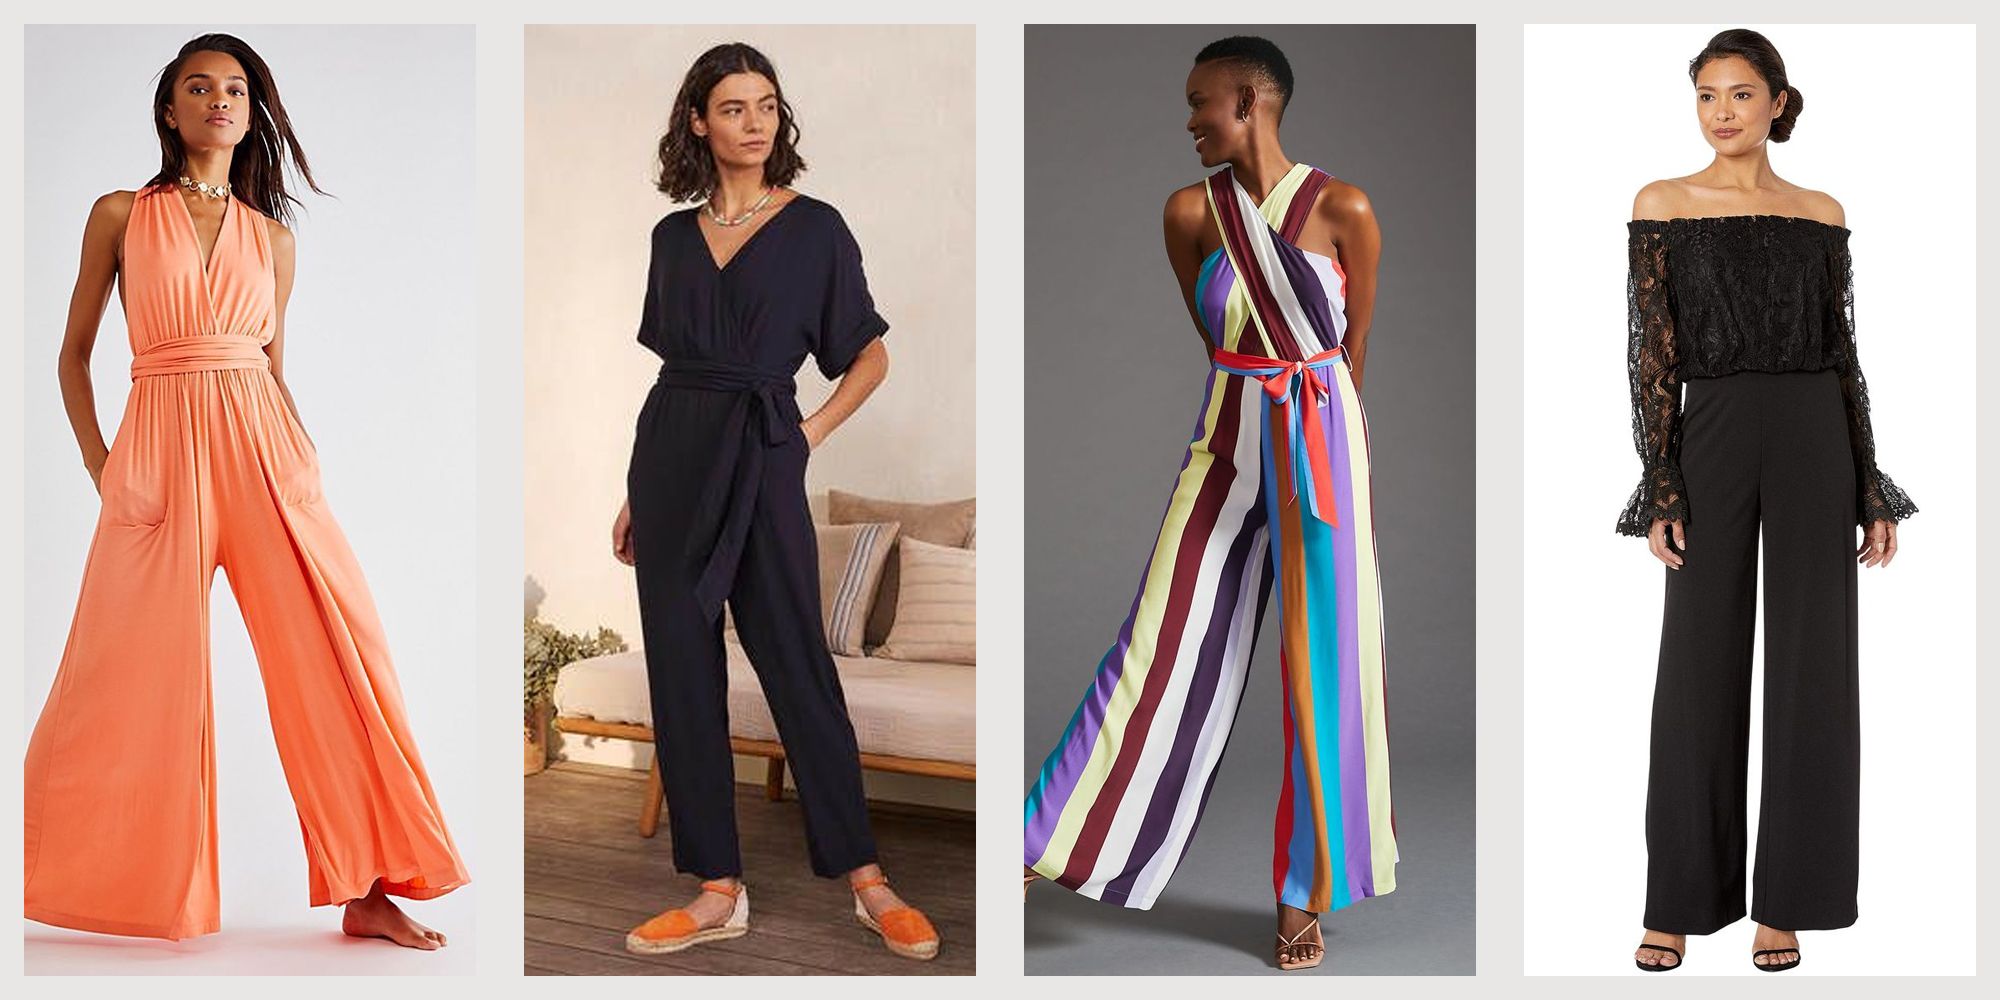 An OffBeat Fashion Rock A Jumpsuit At Your Wedding Functions Like A DIVA   WeddingBazaar